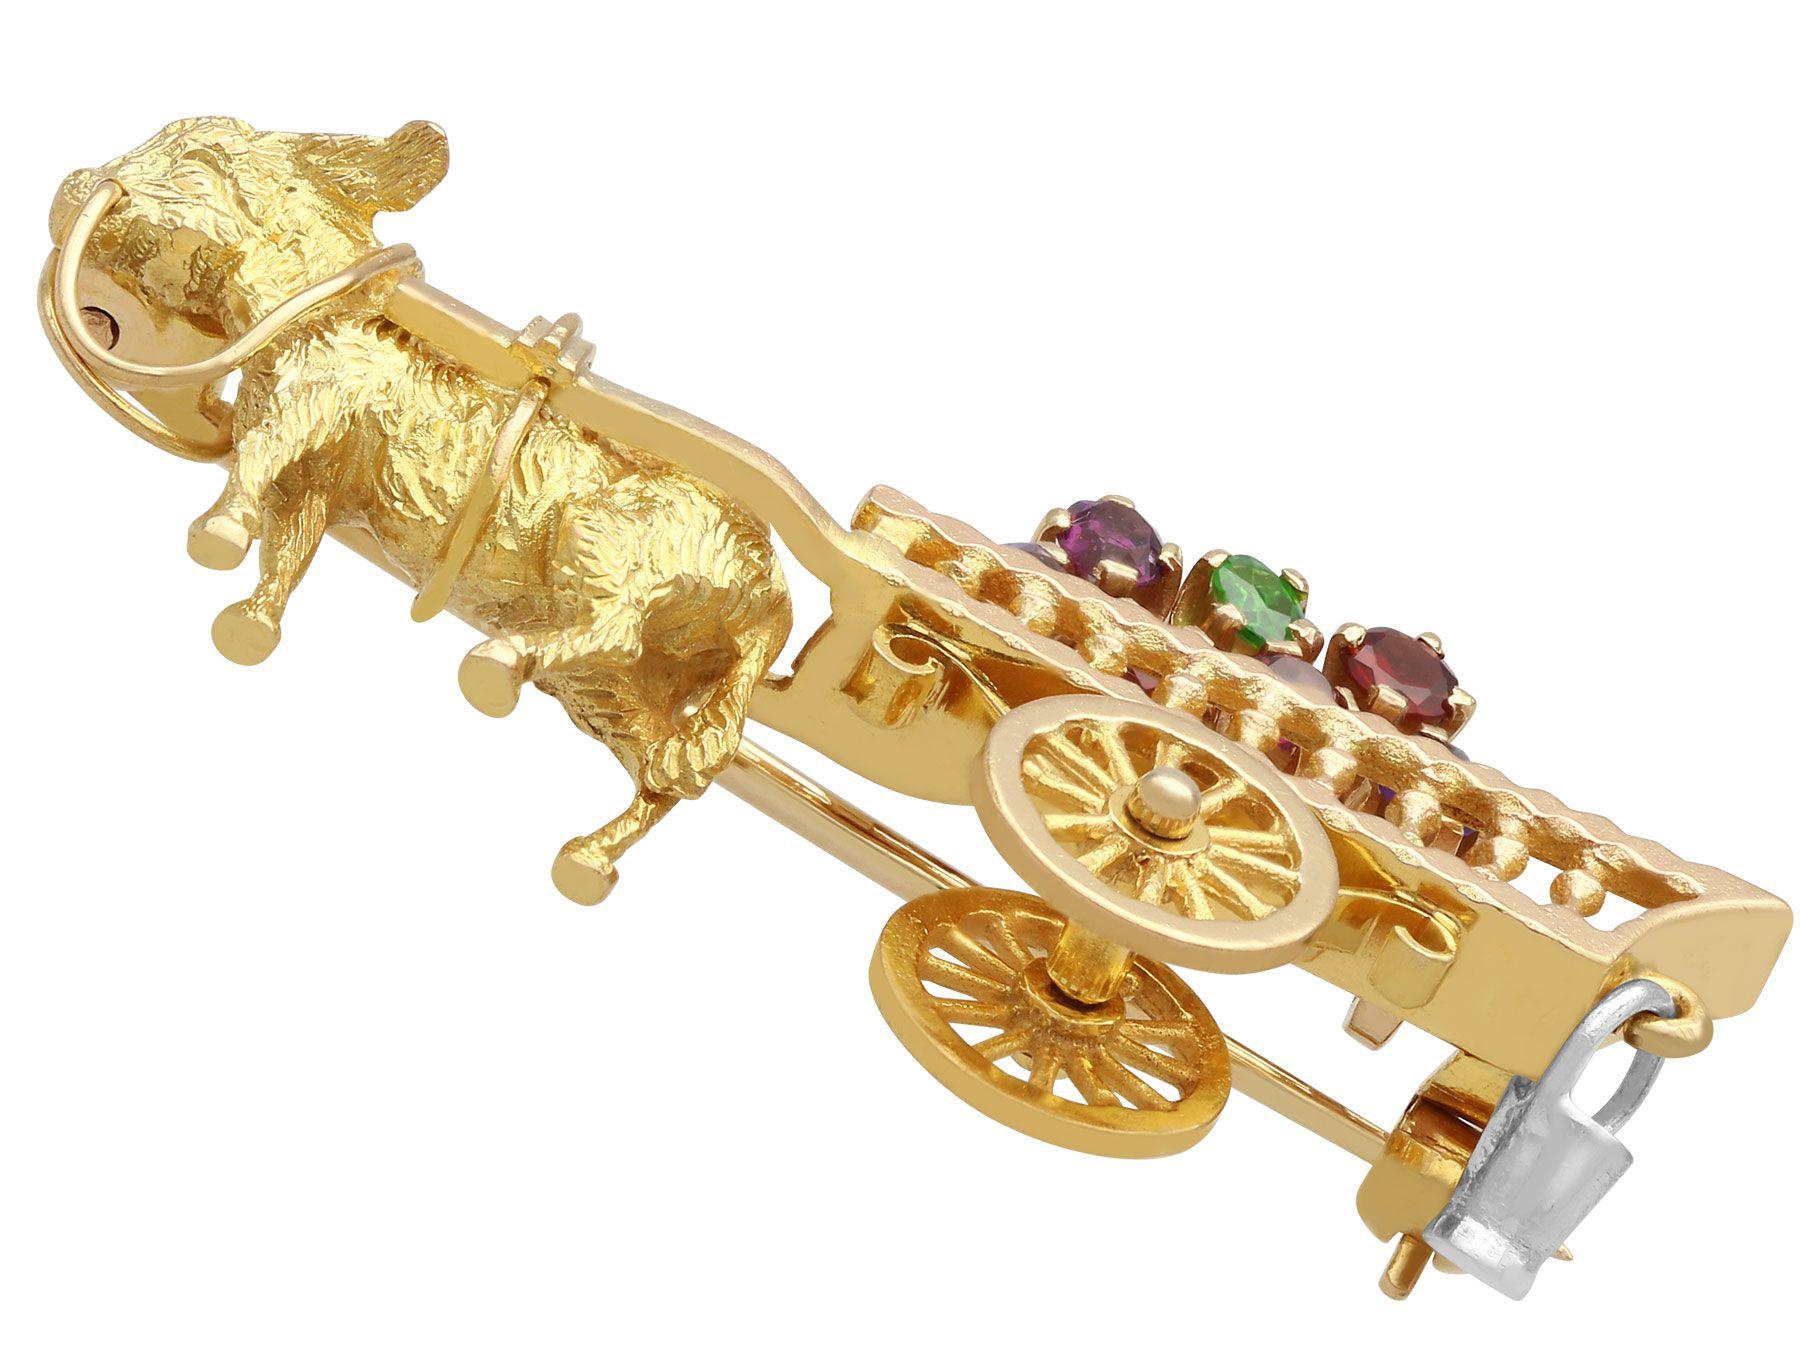 A fine and impressive vintage 0.30 carat (total) amethyst, garnet and peridot, 9 karat gold donkey and cart brooch; part of our diverse vintage jewelry and estate jewelry collections.

This fine and impressive vintage brooch has been crafted in 9k